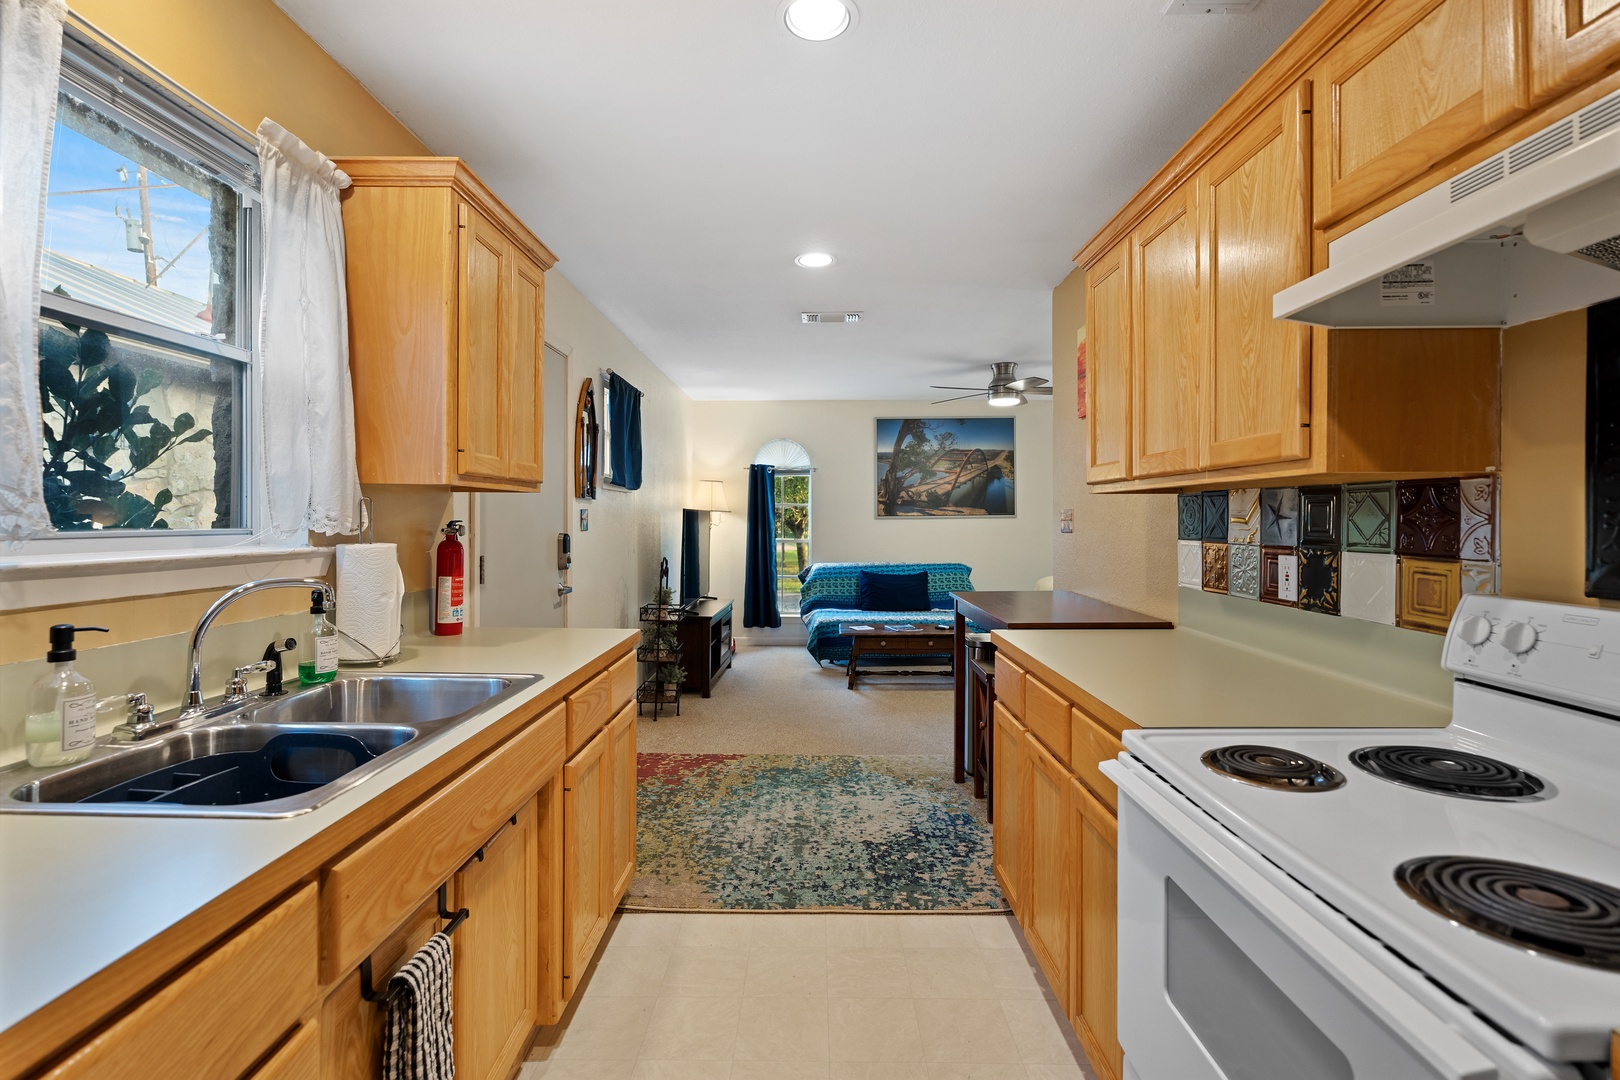 Guests staying in this casita will enjoy a streamlined, well-equipped kitchen